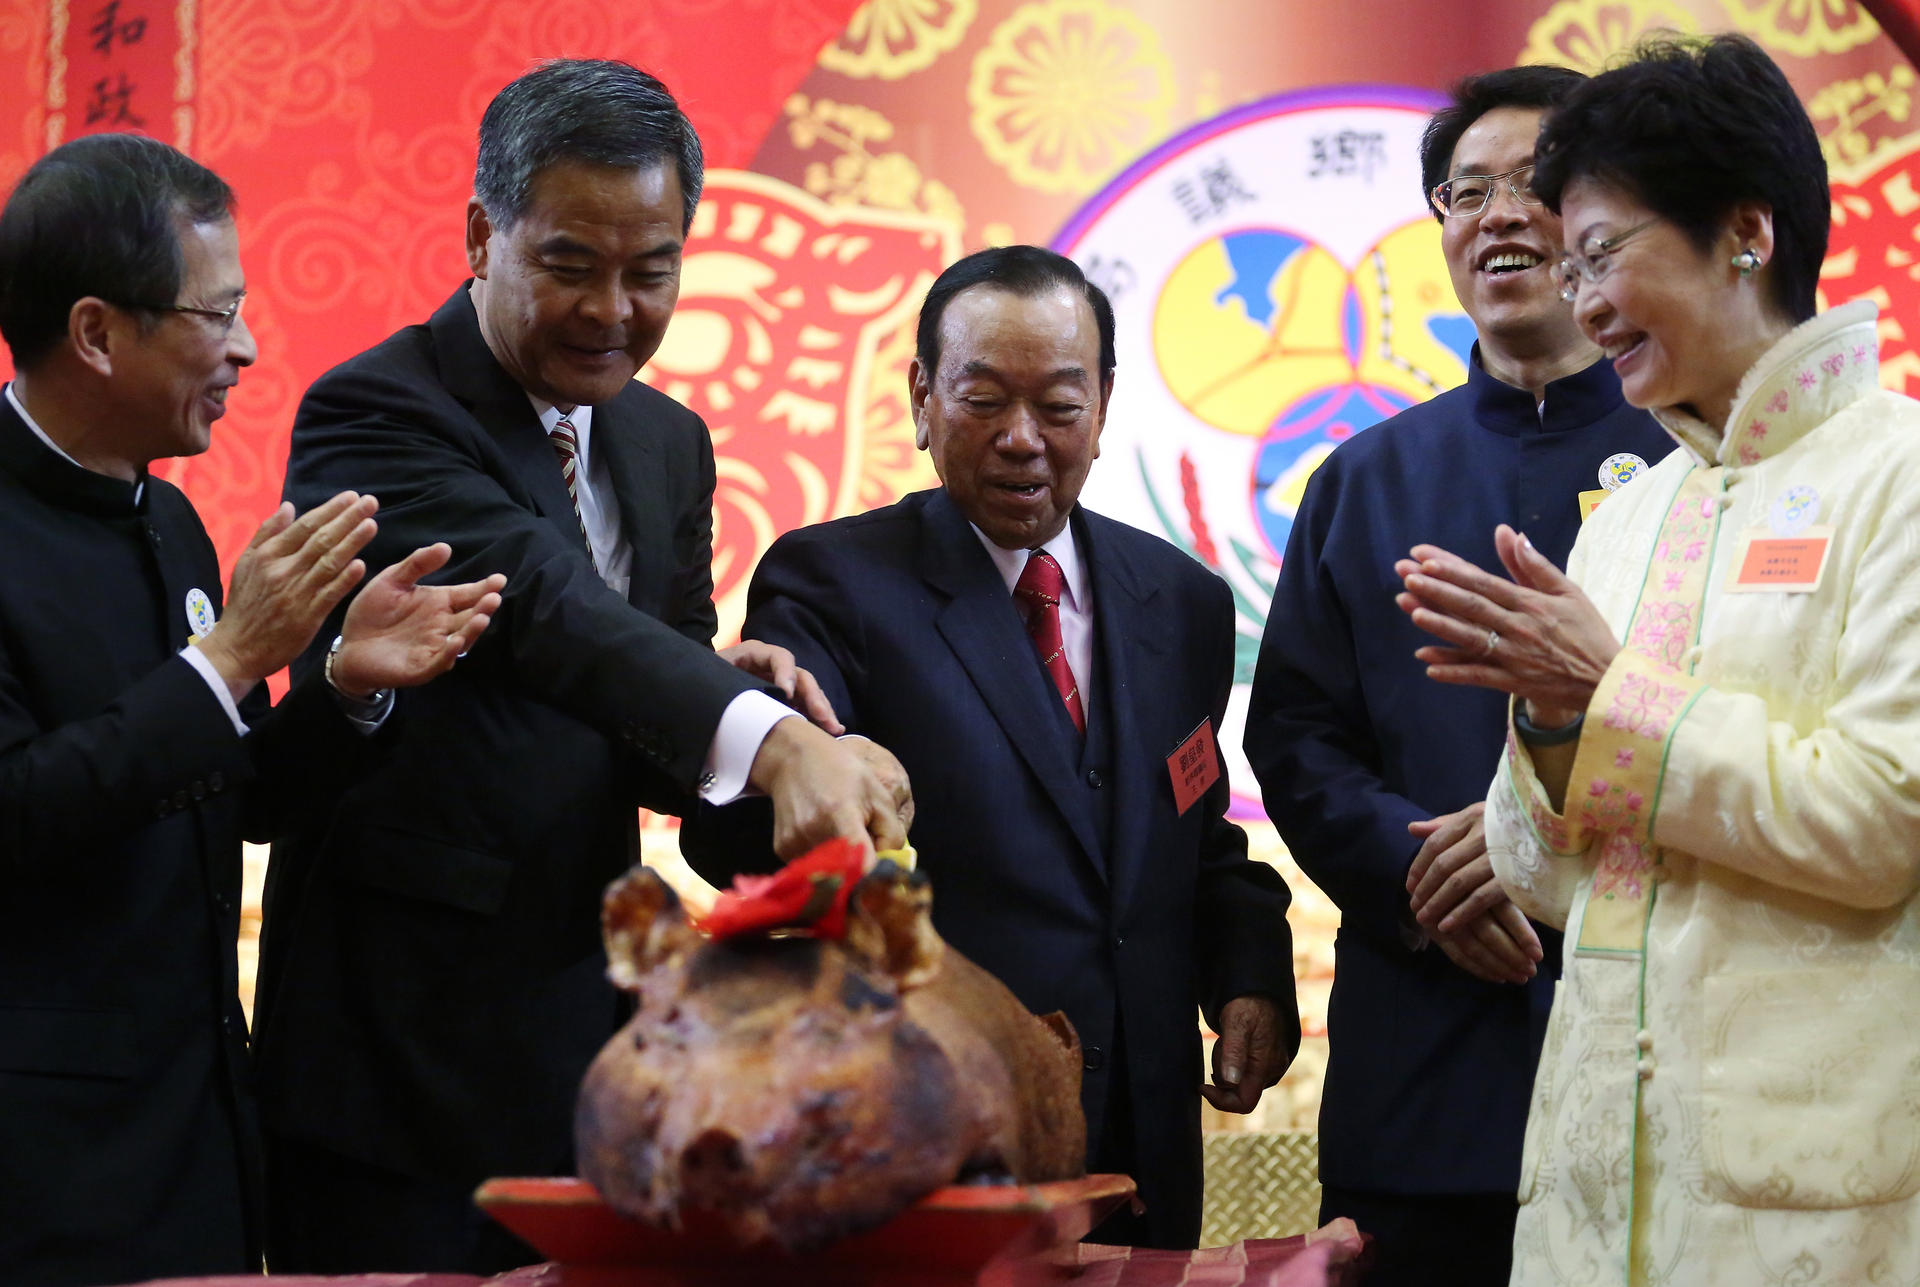 The Heung Yee Kuk hosts a Lunar New Year reception this year attended by government officials. Photo: Felix Wong